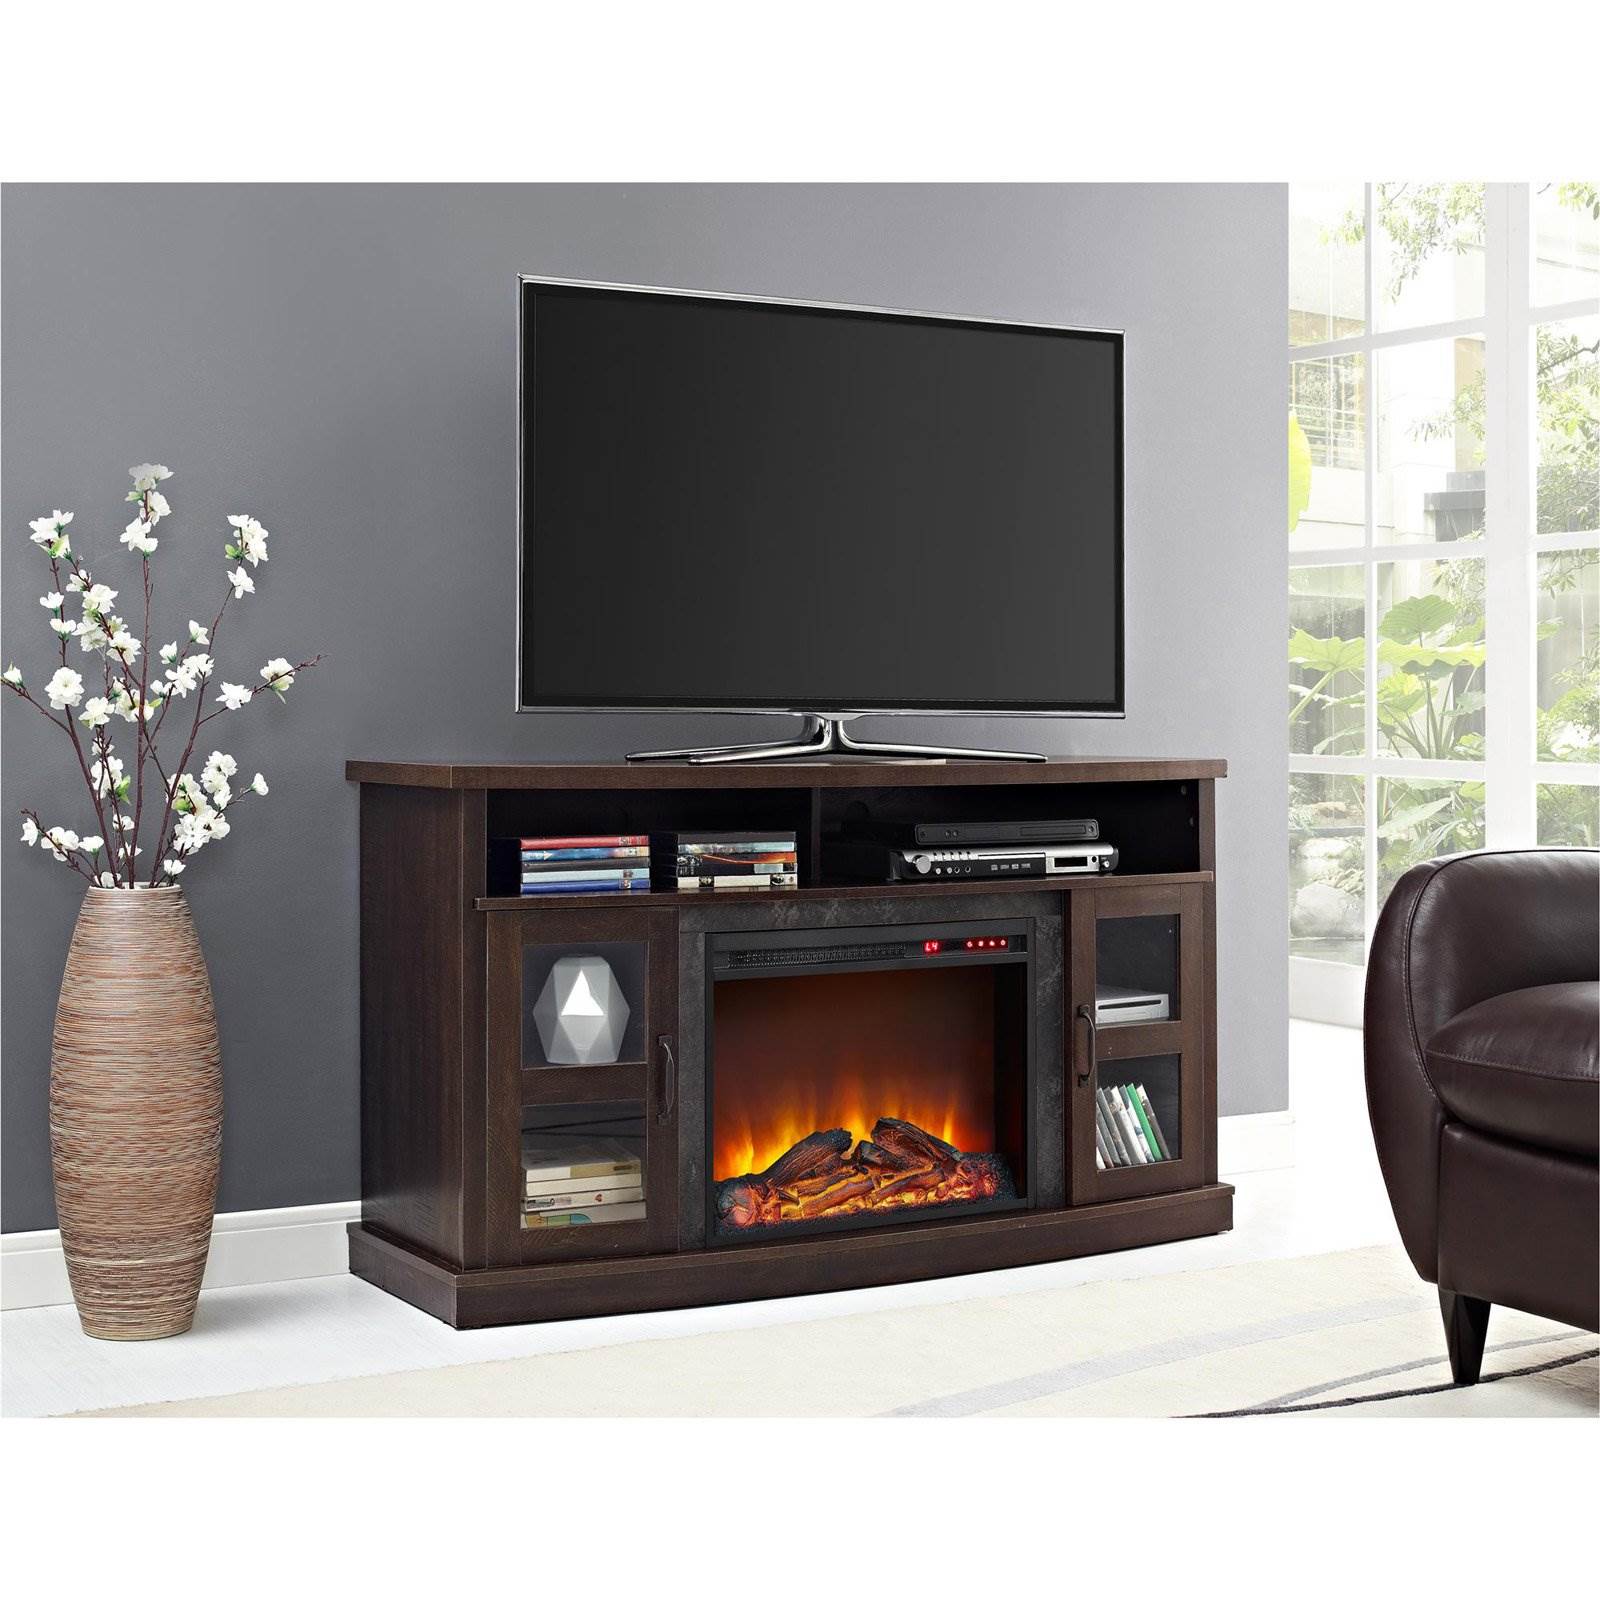 Big Lots Electric Fireplace Lovely White Electric Fireplace Tv Stand